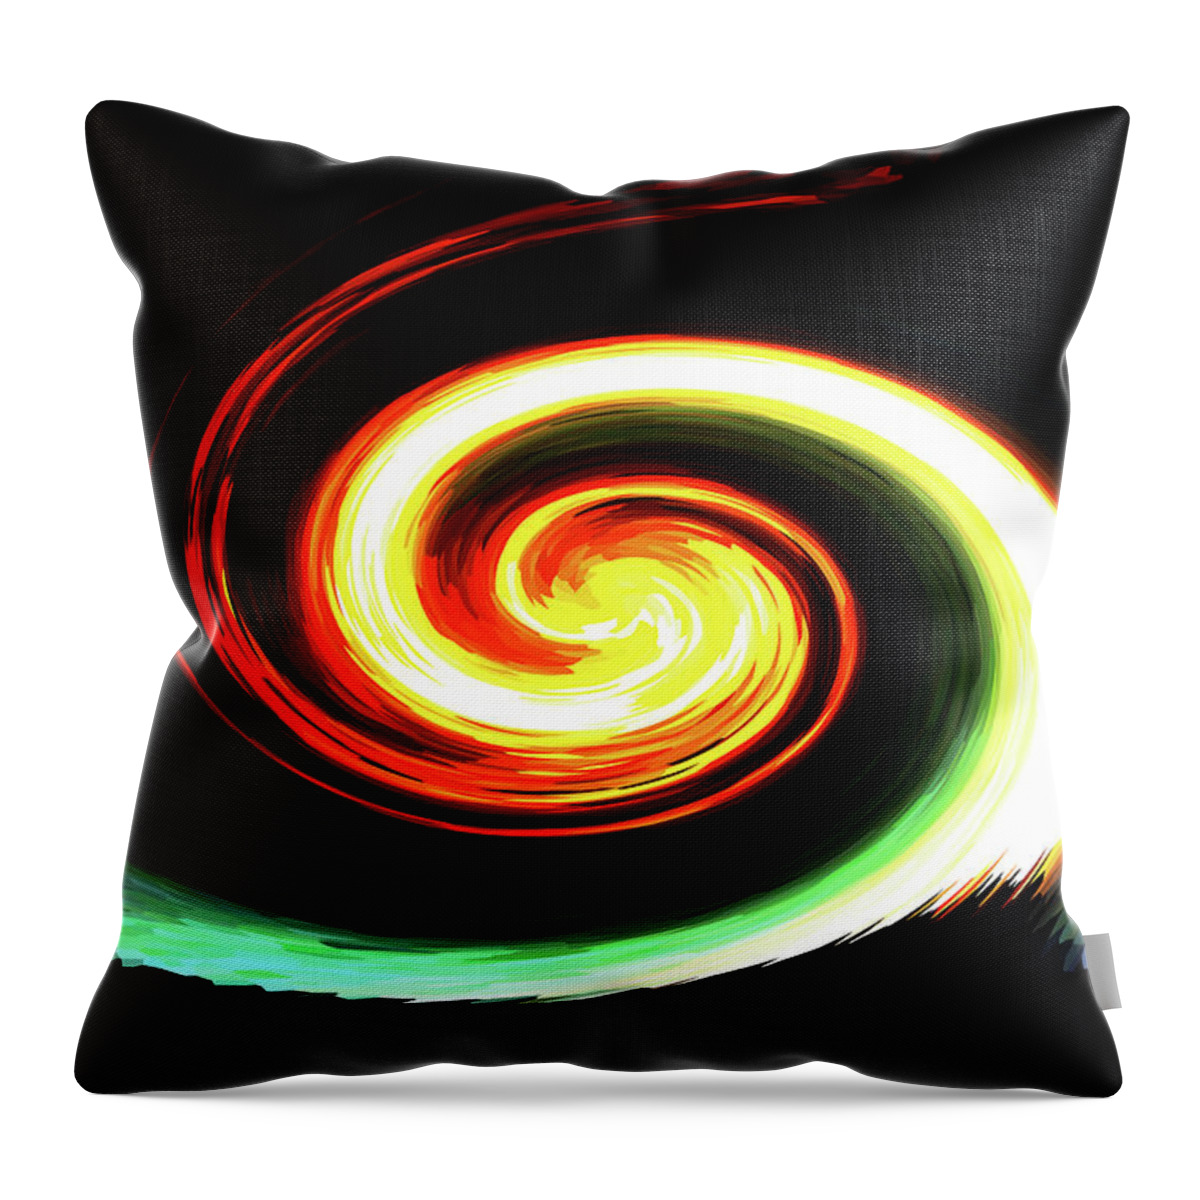 Mammatrain Throw Pillow featuring the photograph Altered State by Trina R Sellers